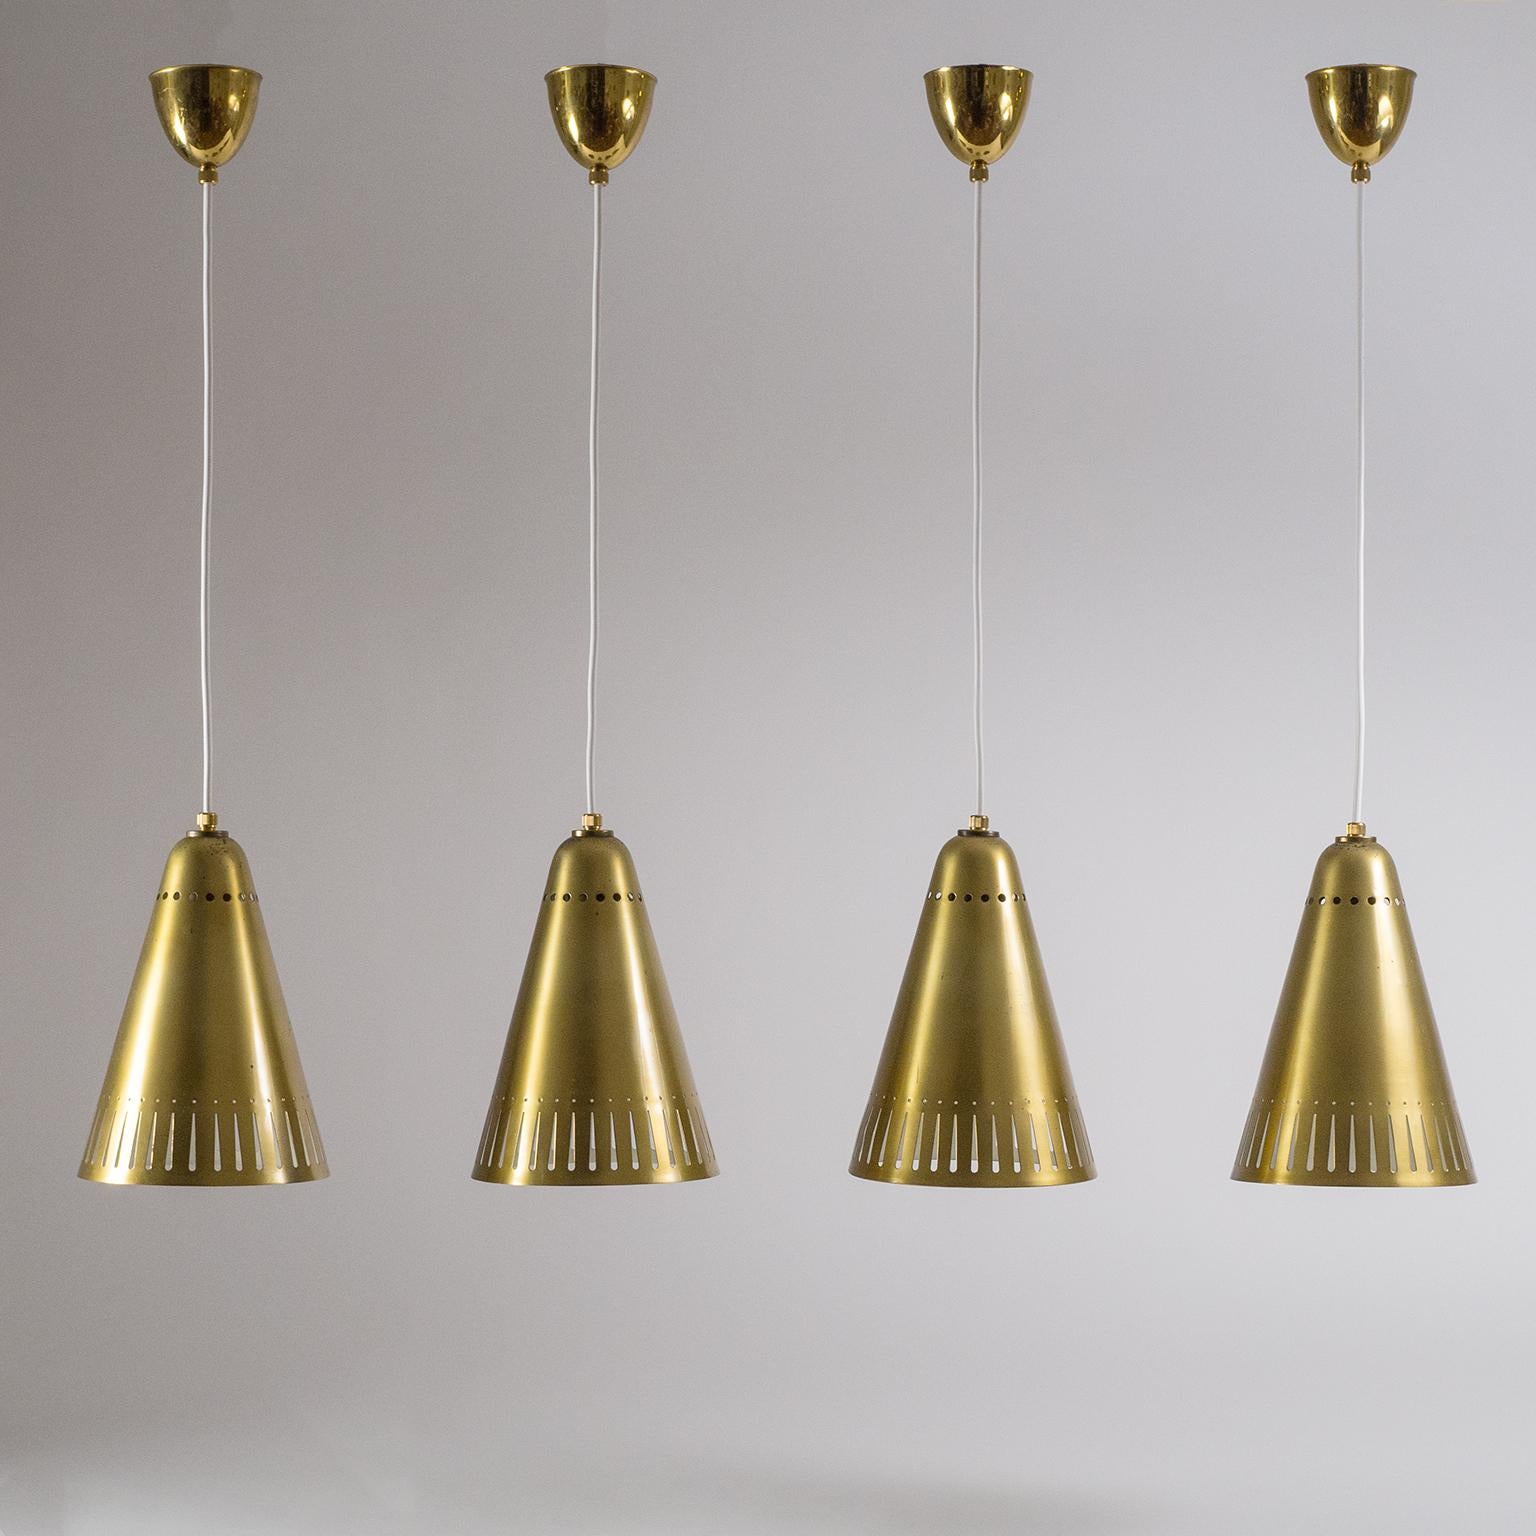 Lovely midcentury brass pendants from the 1950s. The all-brass cones have a very unique pattern of perforations which comes to life when lit. There is a charming patina of varying degrees on the brass and original white lacquer on the inside in very